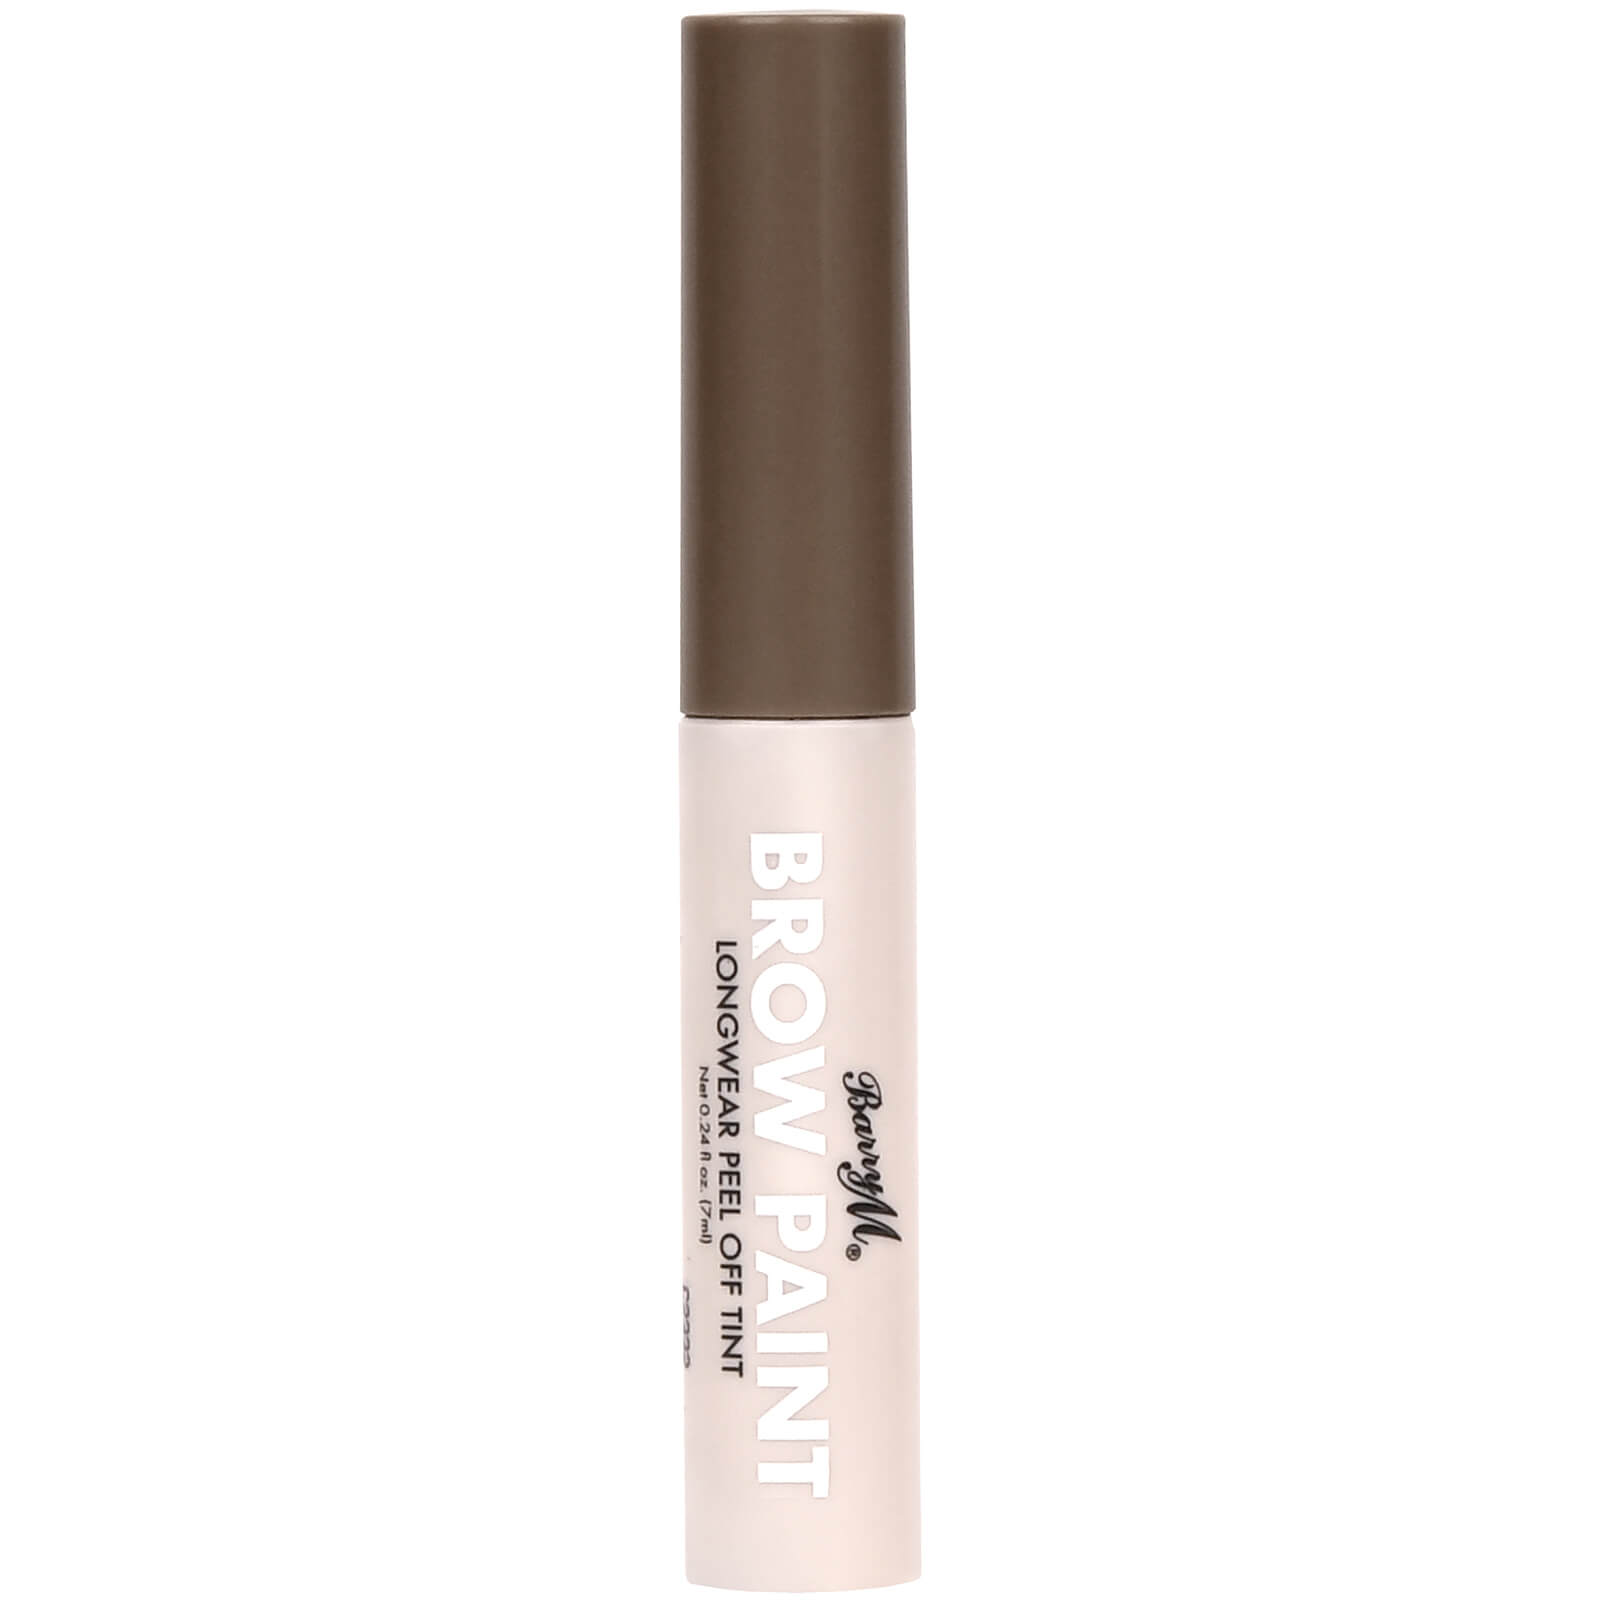 Image of Barry M Cosmetics Brow Paint Longwear Peel off Tint 7.5g (Various Shades) - Black